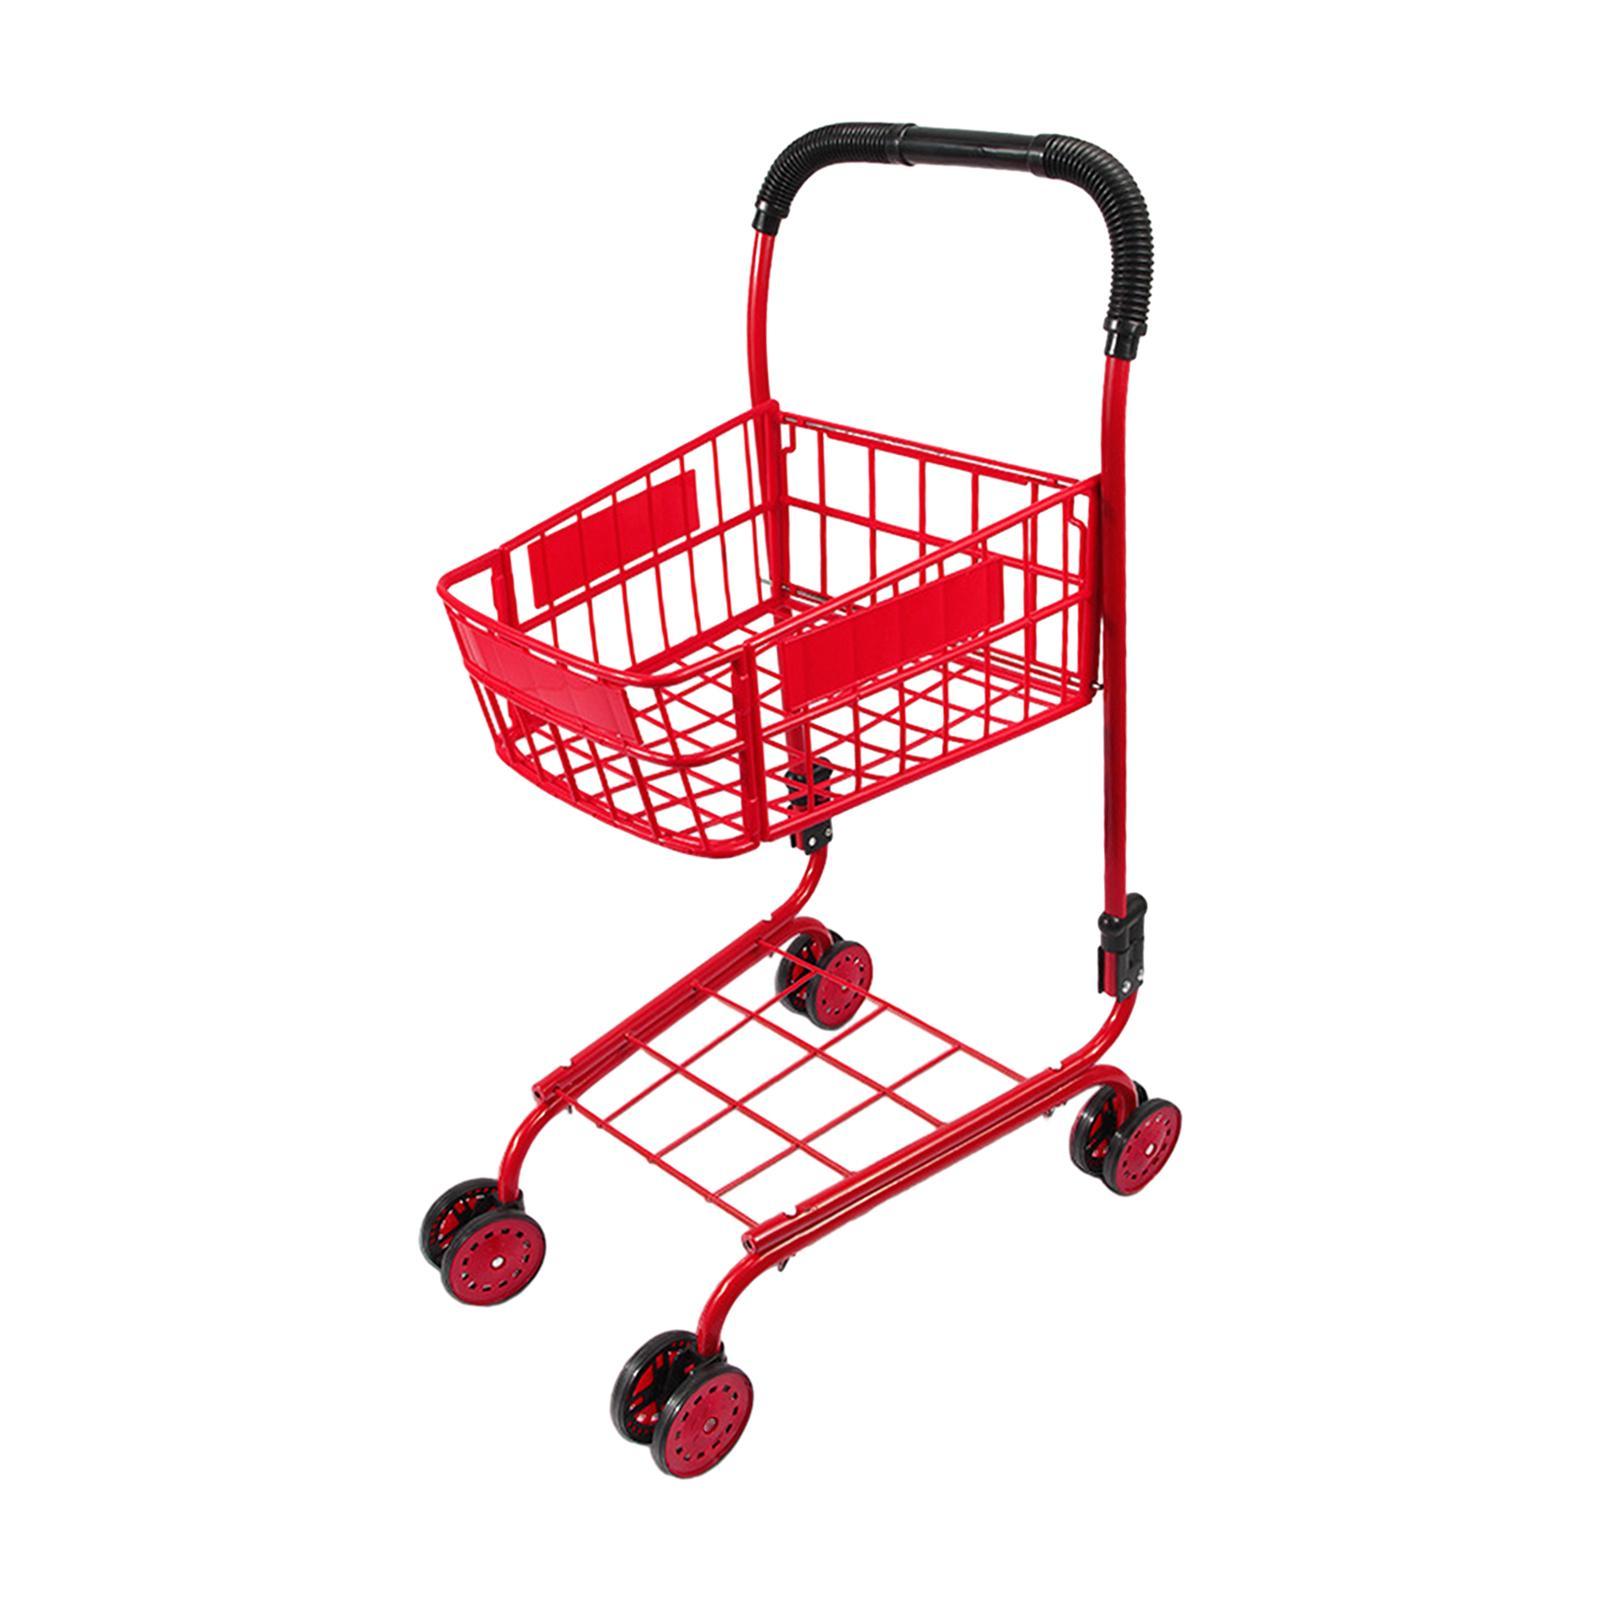 Doll Collection Shopping Cart Kids Shopping Trolley for Kids Boys Girls